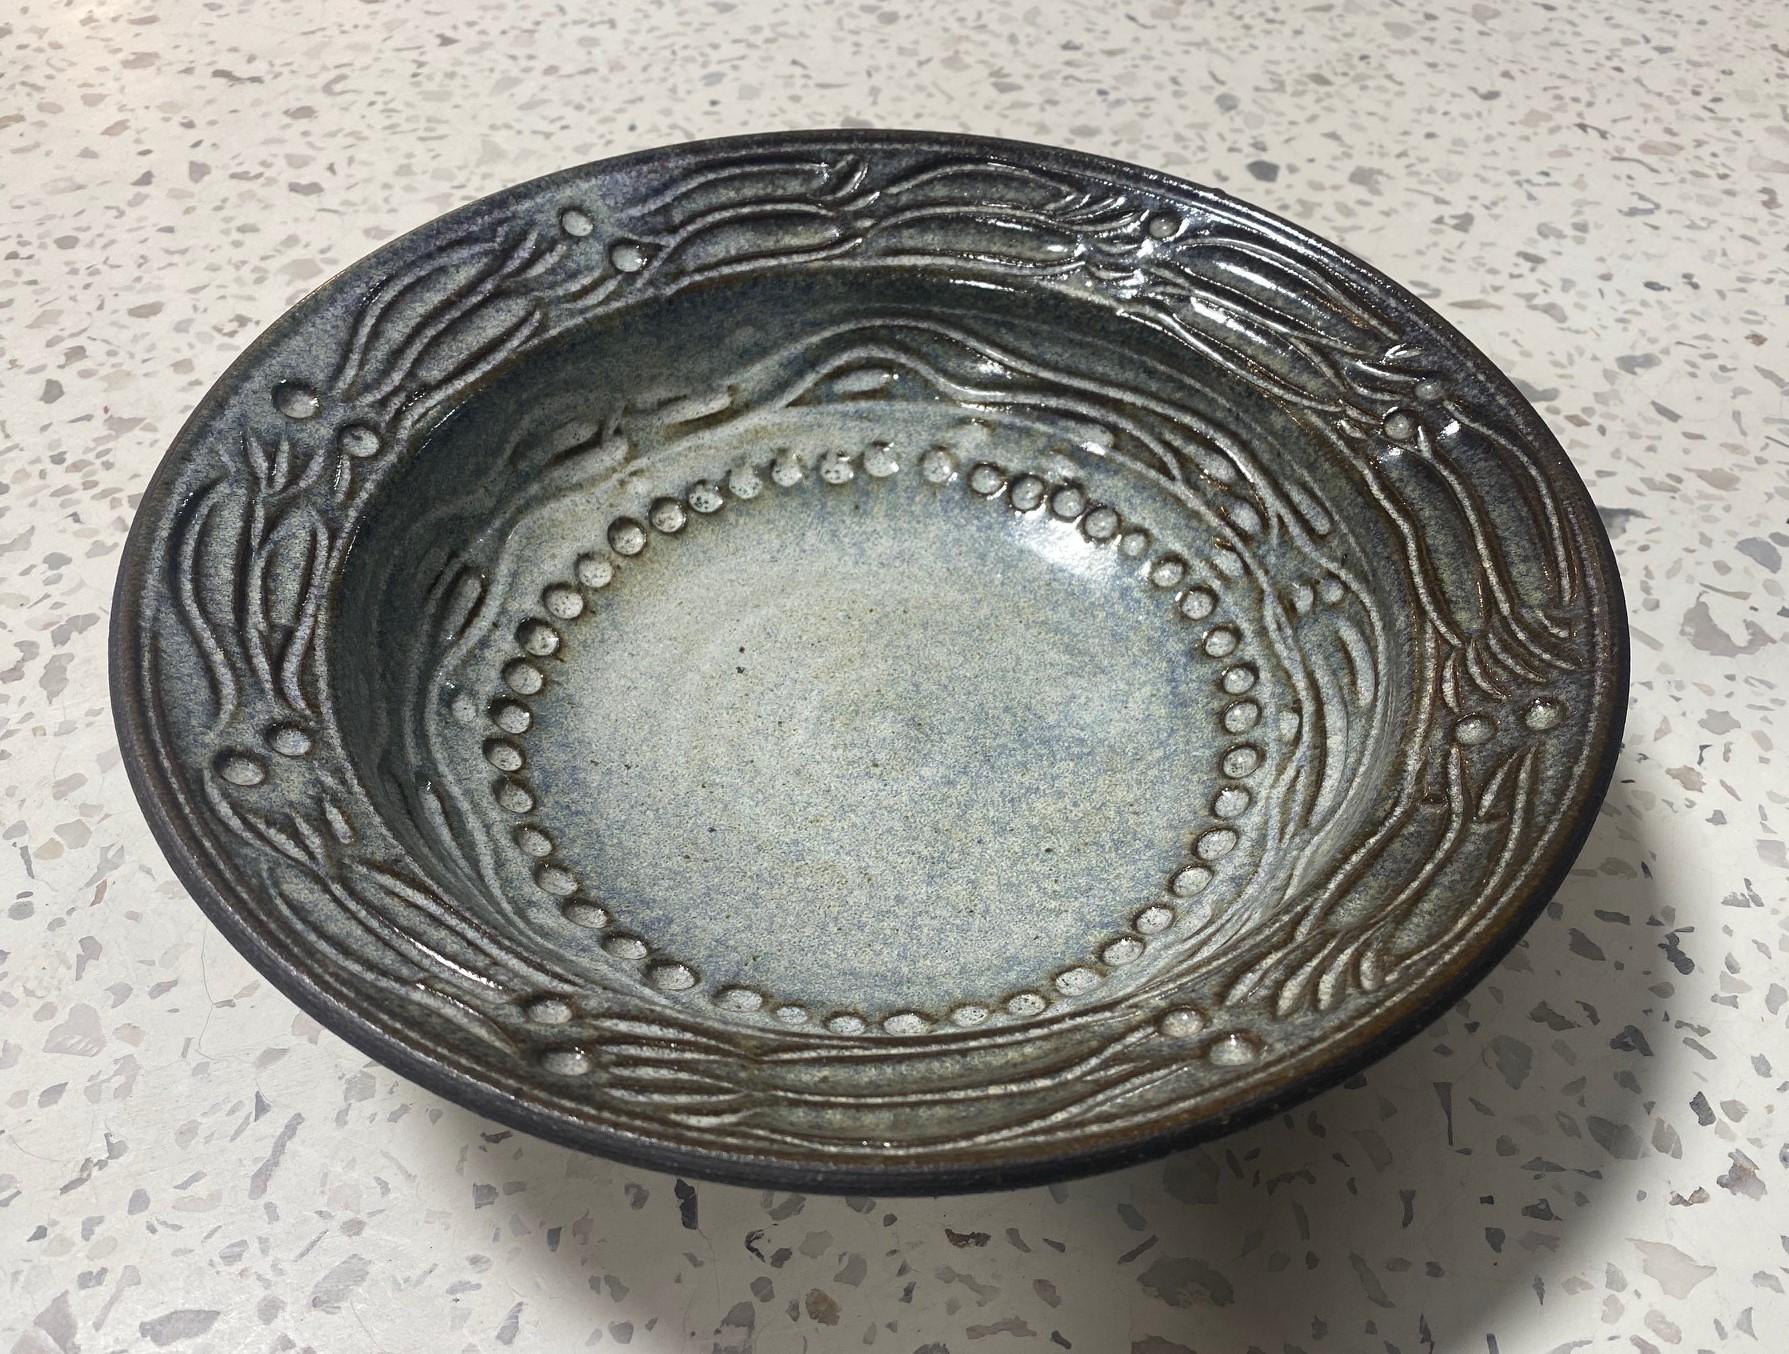 A beautifully designed and gorgeously glazed large bowl by famed Mexican-American California studio art potter Dora De Larios.   This piece was done late in her career and in collaboration with Irving Place Studio, her and her daughter's pottery